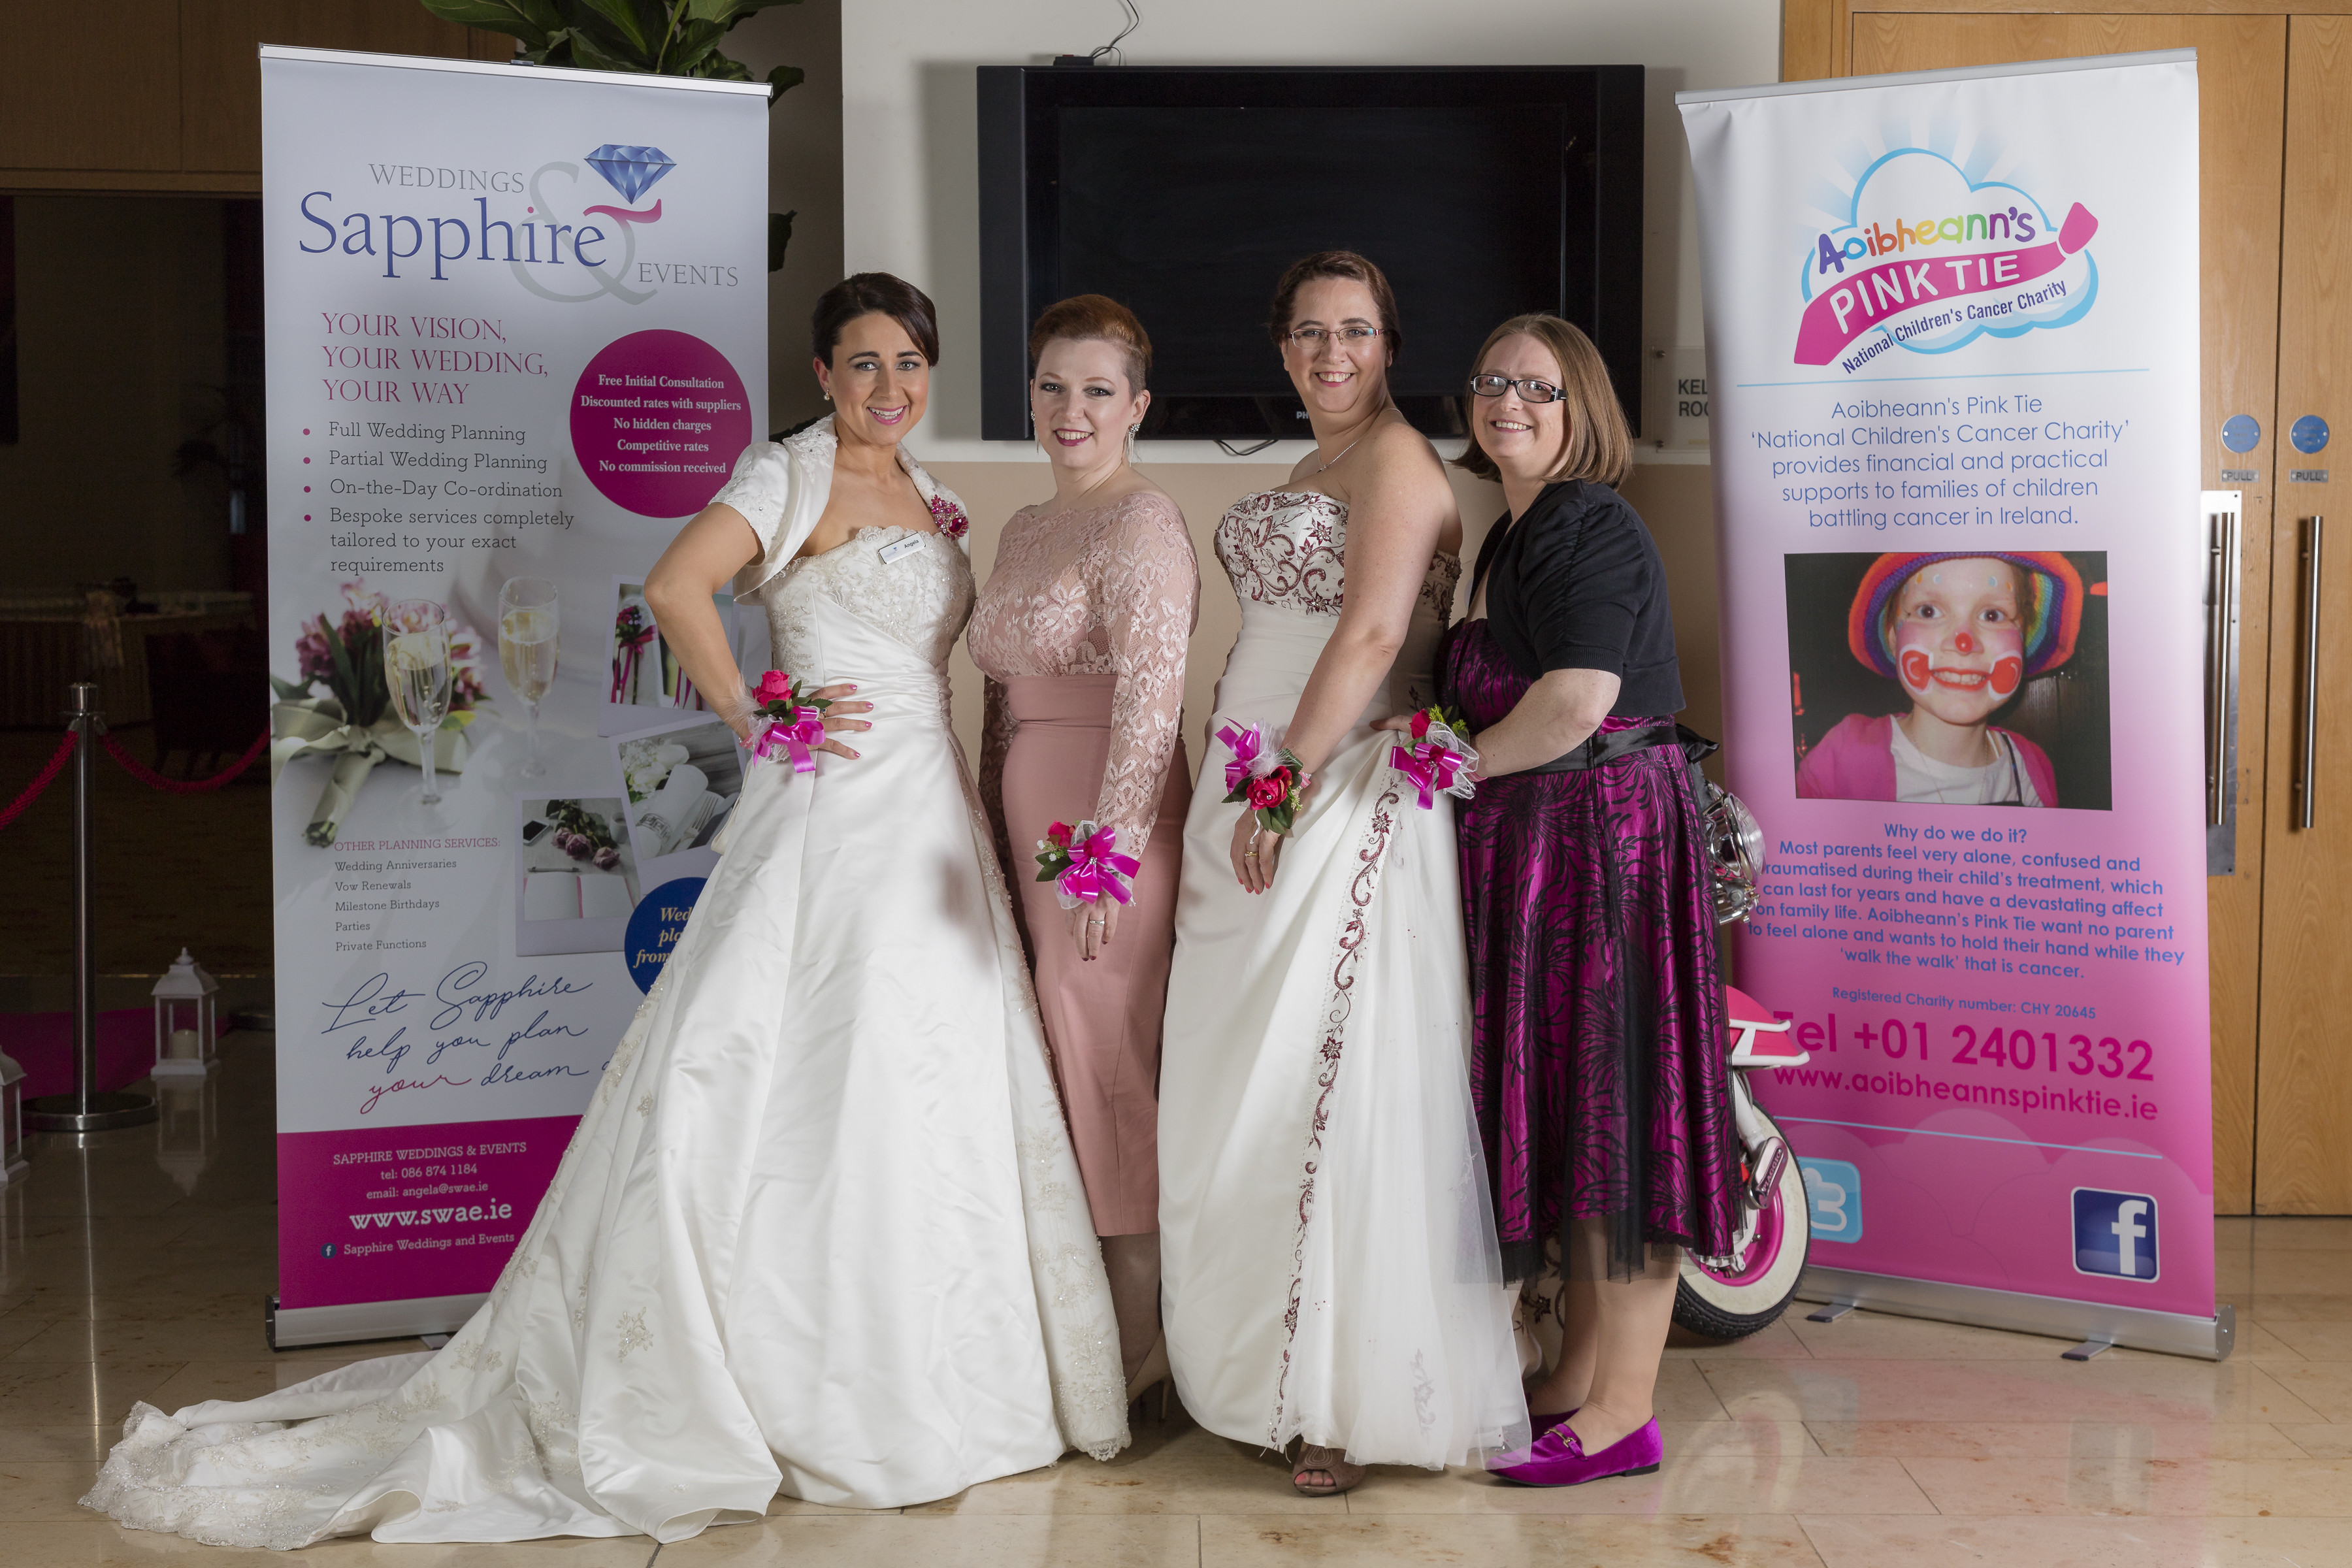 Bridal & Pink Tie Charity Ball in aid of Aoibheann’s Pink Tie